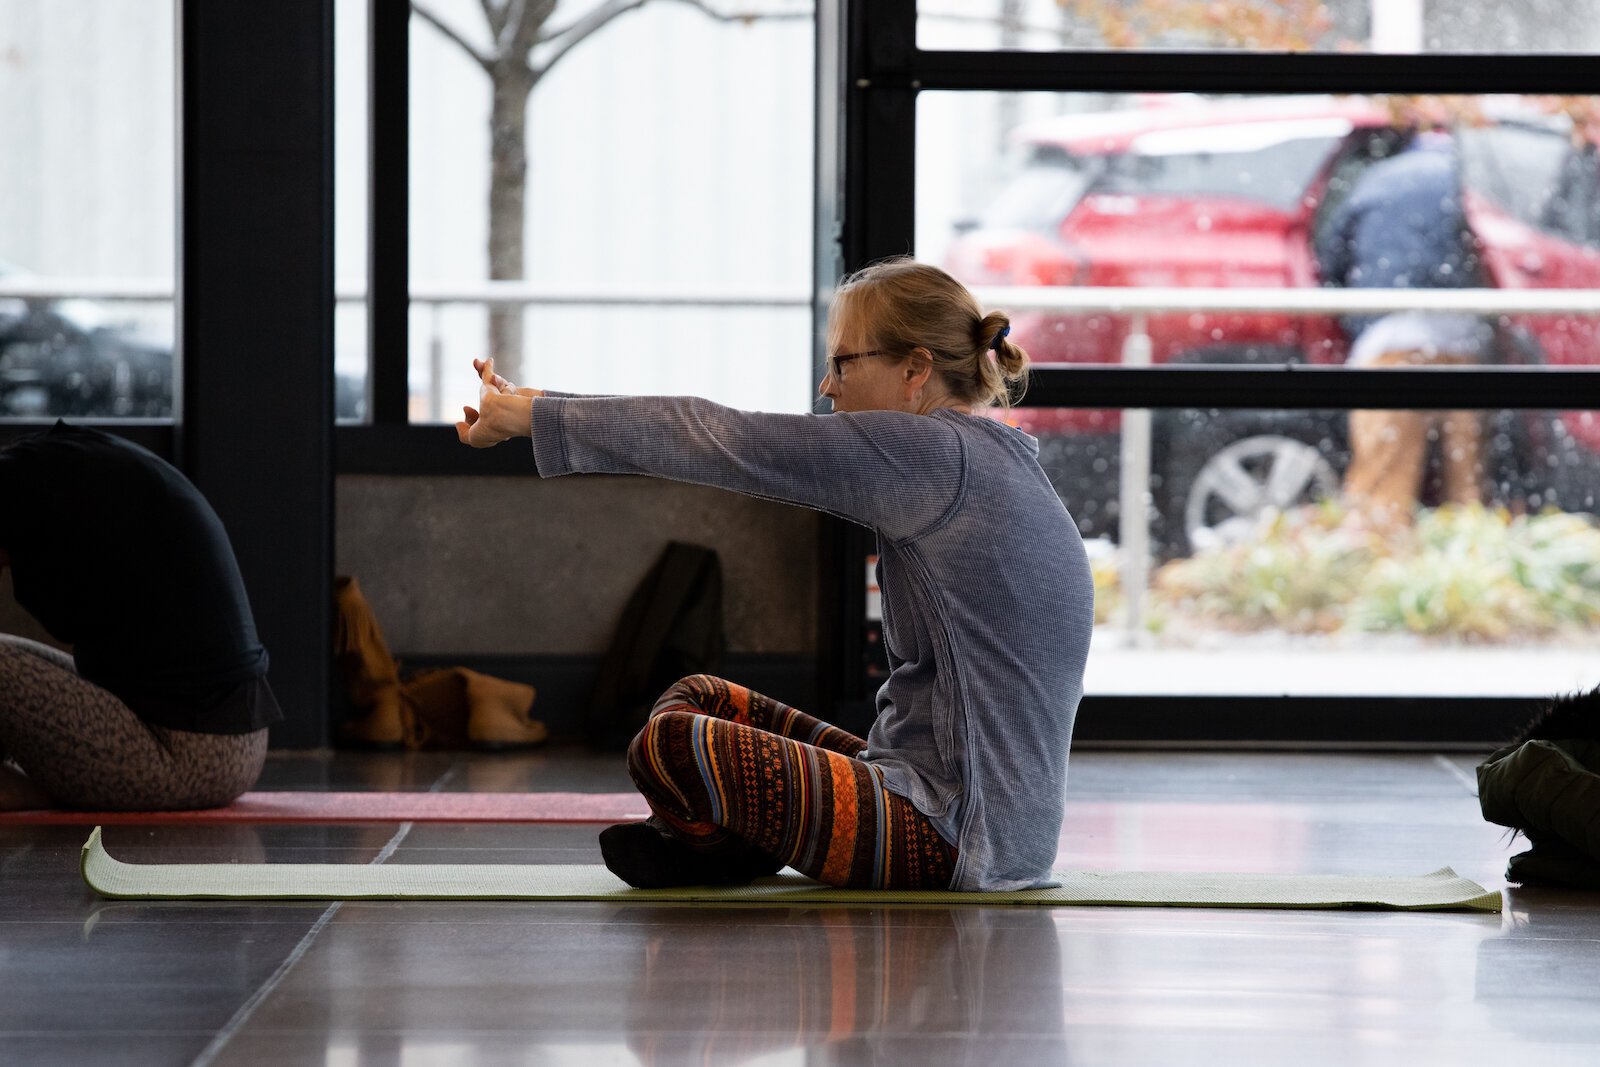 Discover Yoga Fort Wayne classes accommodate participants of all body types and skill levels, from beginners to advanced.